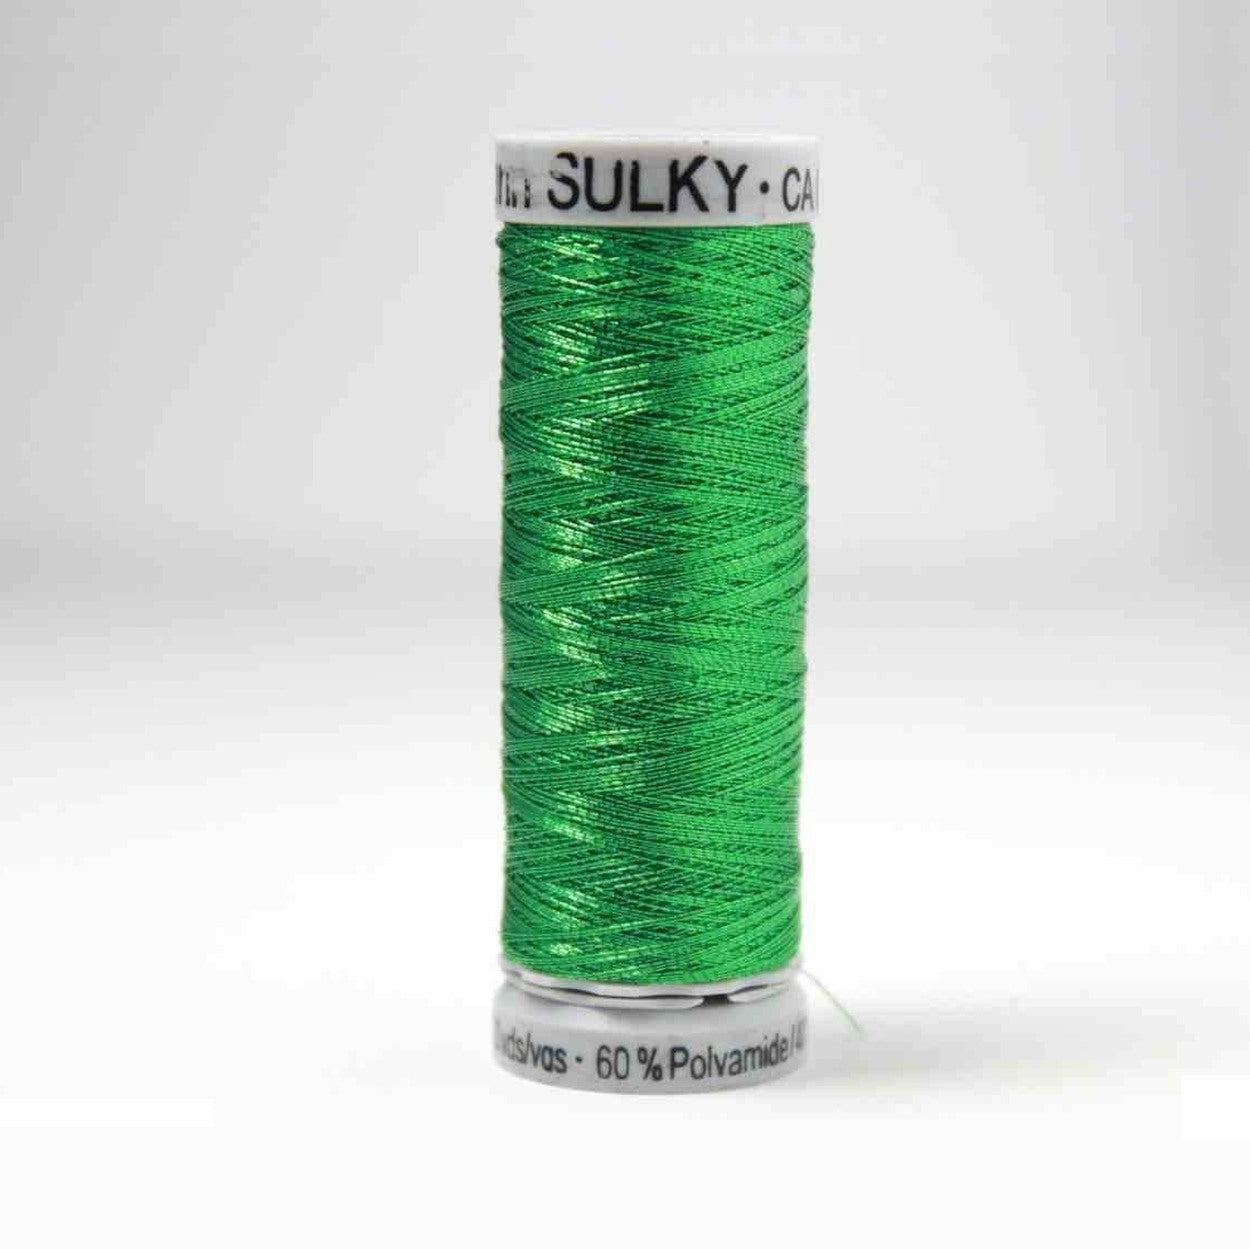 Sulky Metallic Embroidery Thread 7018 Christmas Green from Jaycotts Sewing Supplies